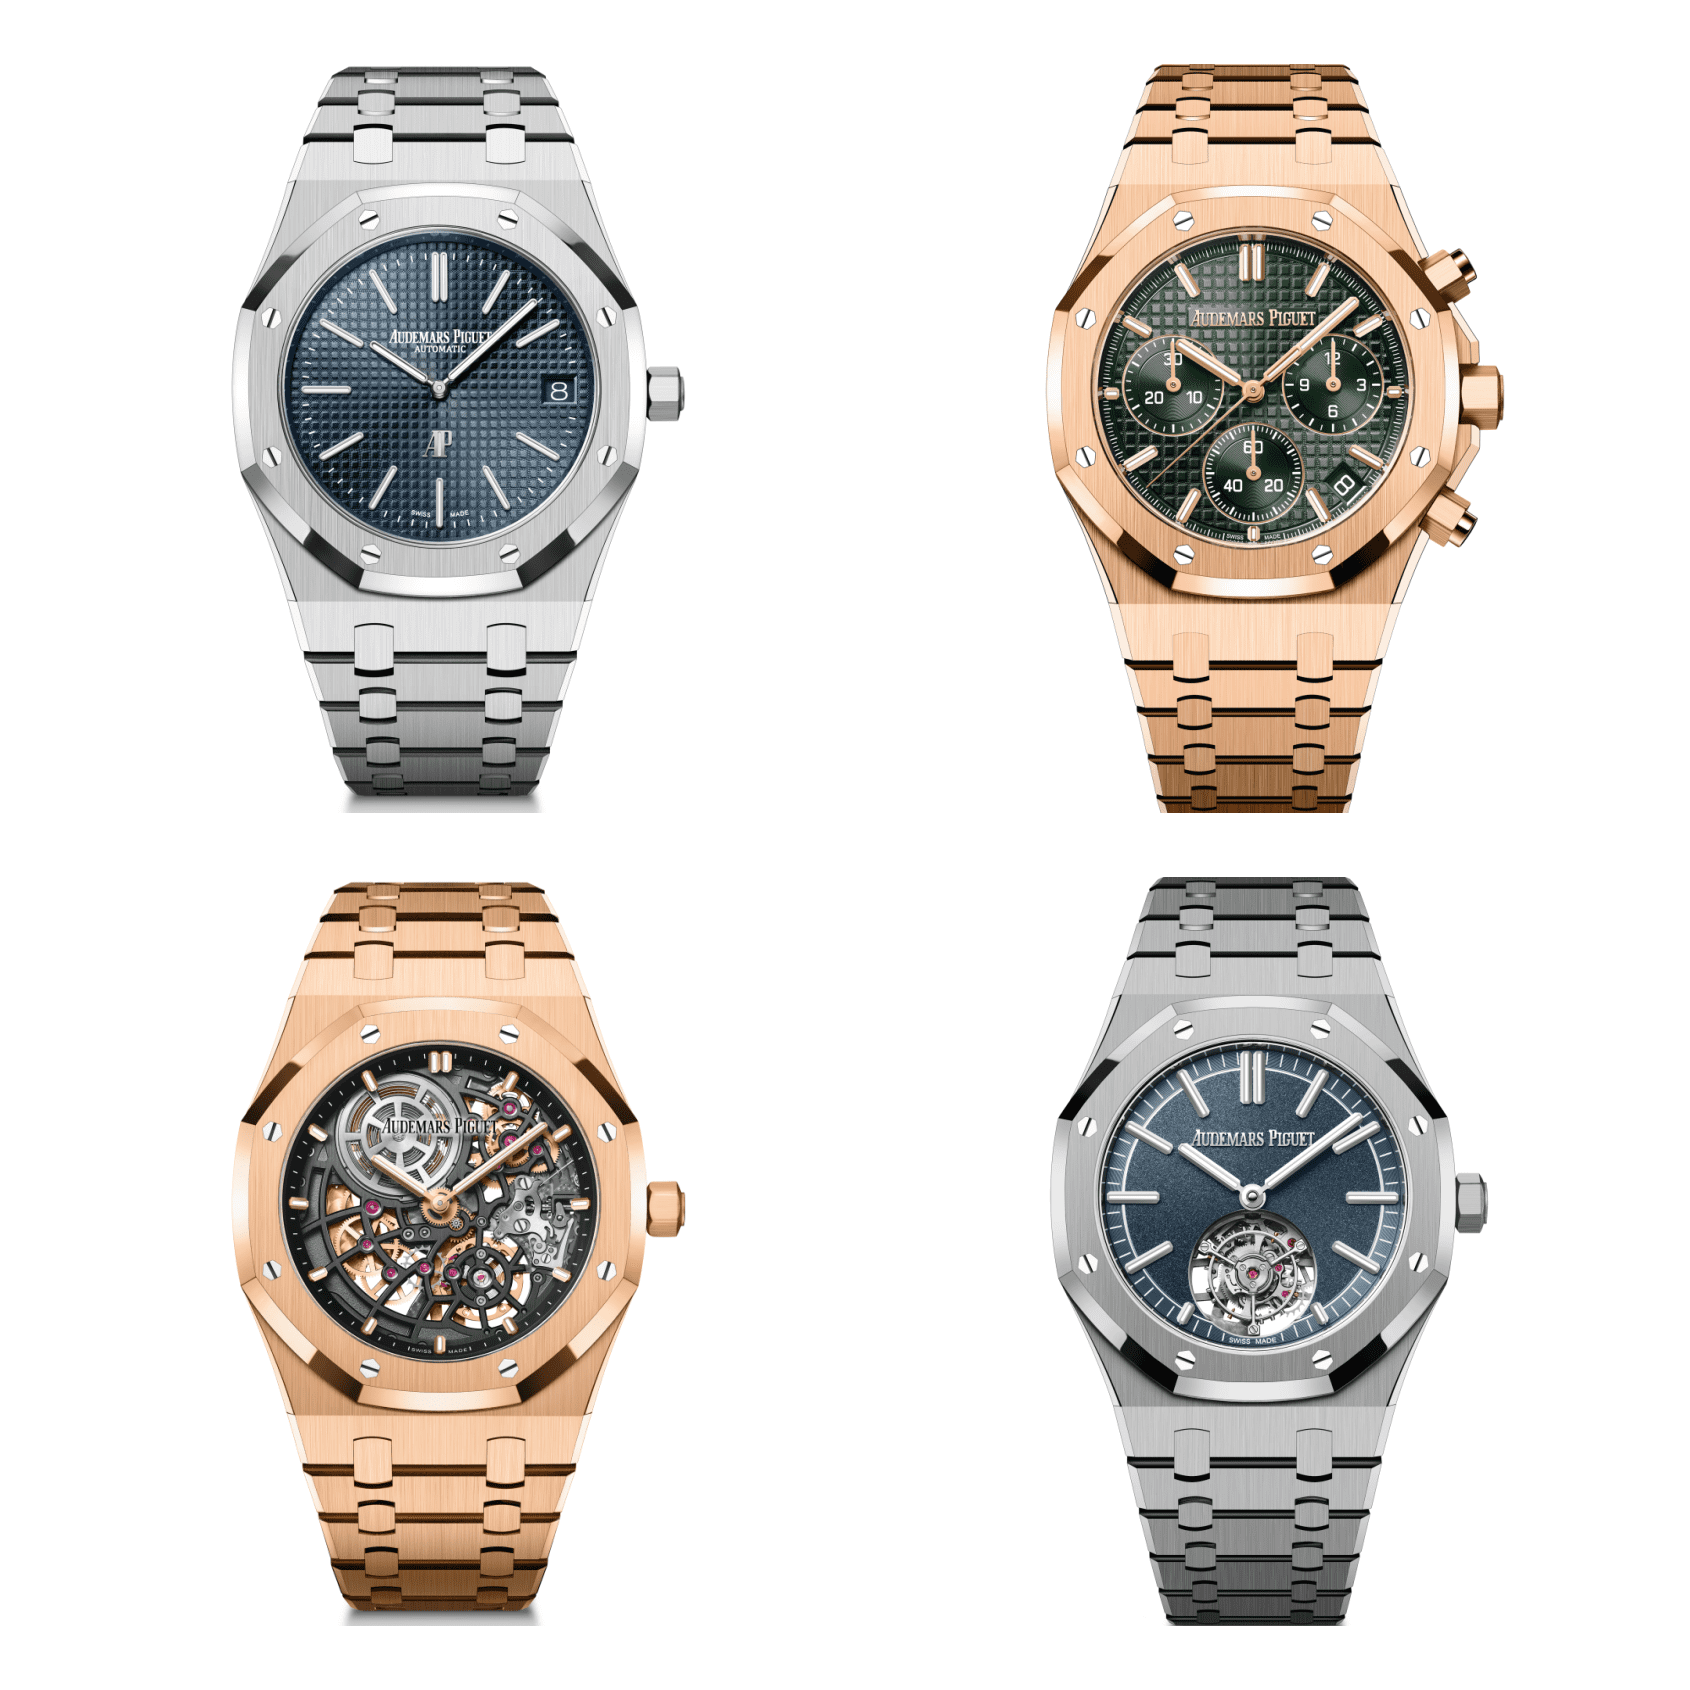 All of the 42 new Audemars Piguet Royal Oak 50th anniversary releases of 2022